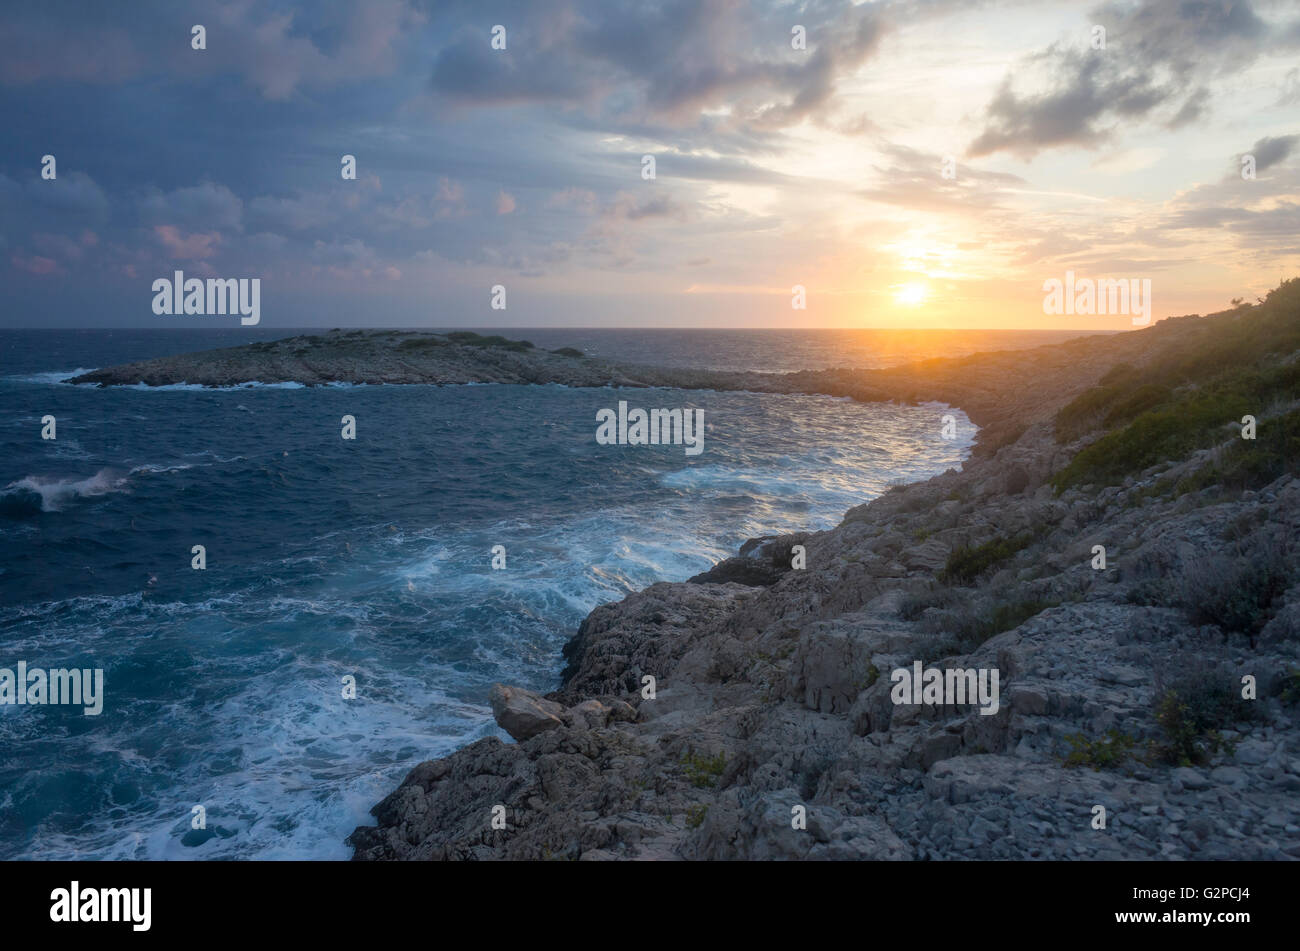 Razanj Croatia Europe. Landscape and nature photo. Adriatic Sea at dawn and sunset. Stormy warm summer evening with beautiful colors and tones. Stock Photo